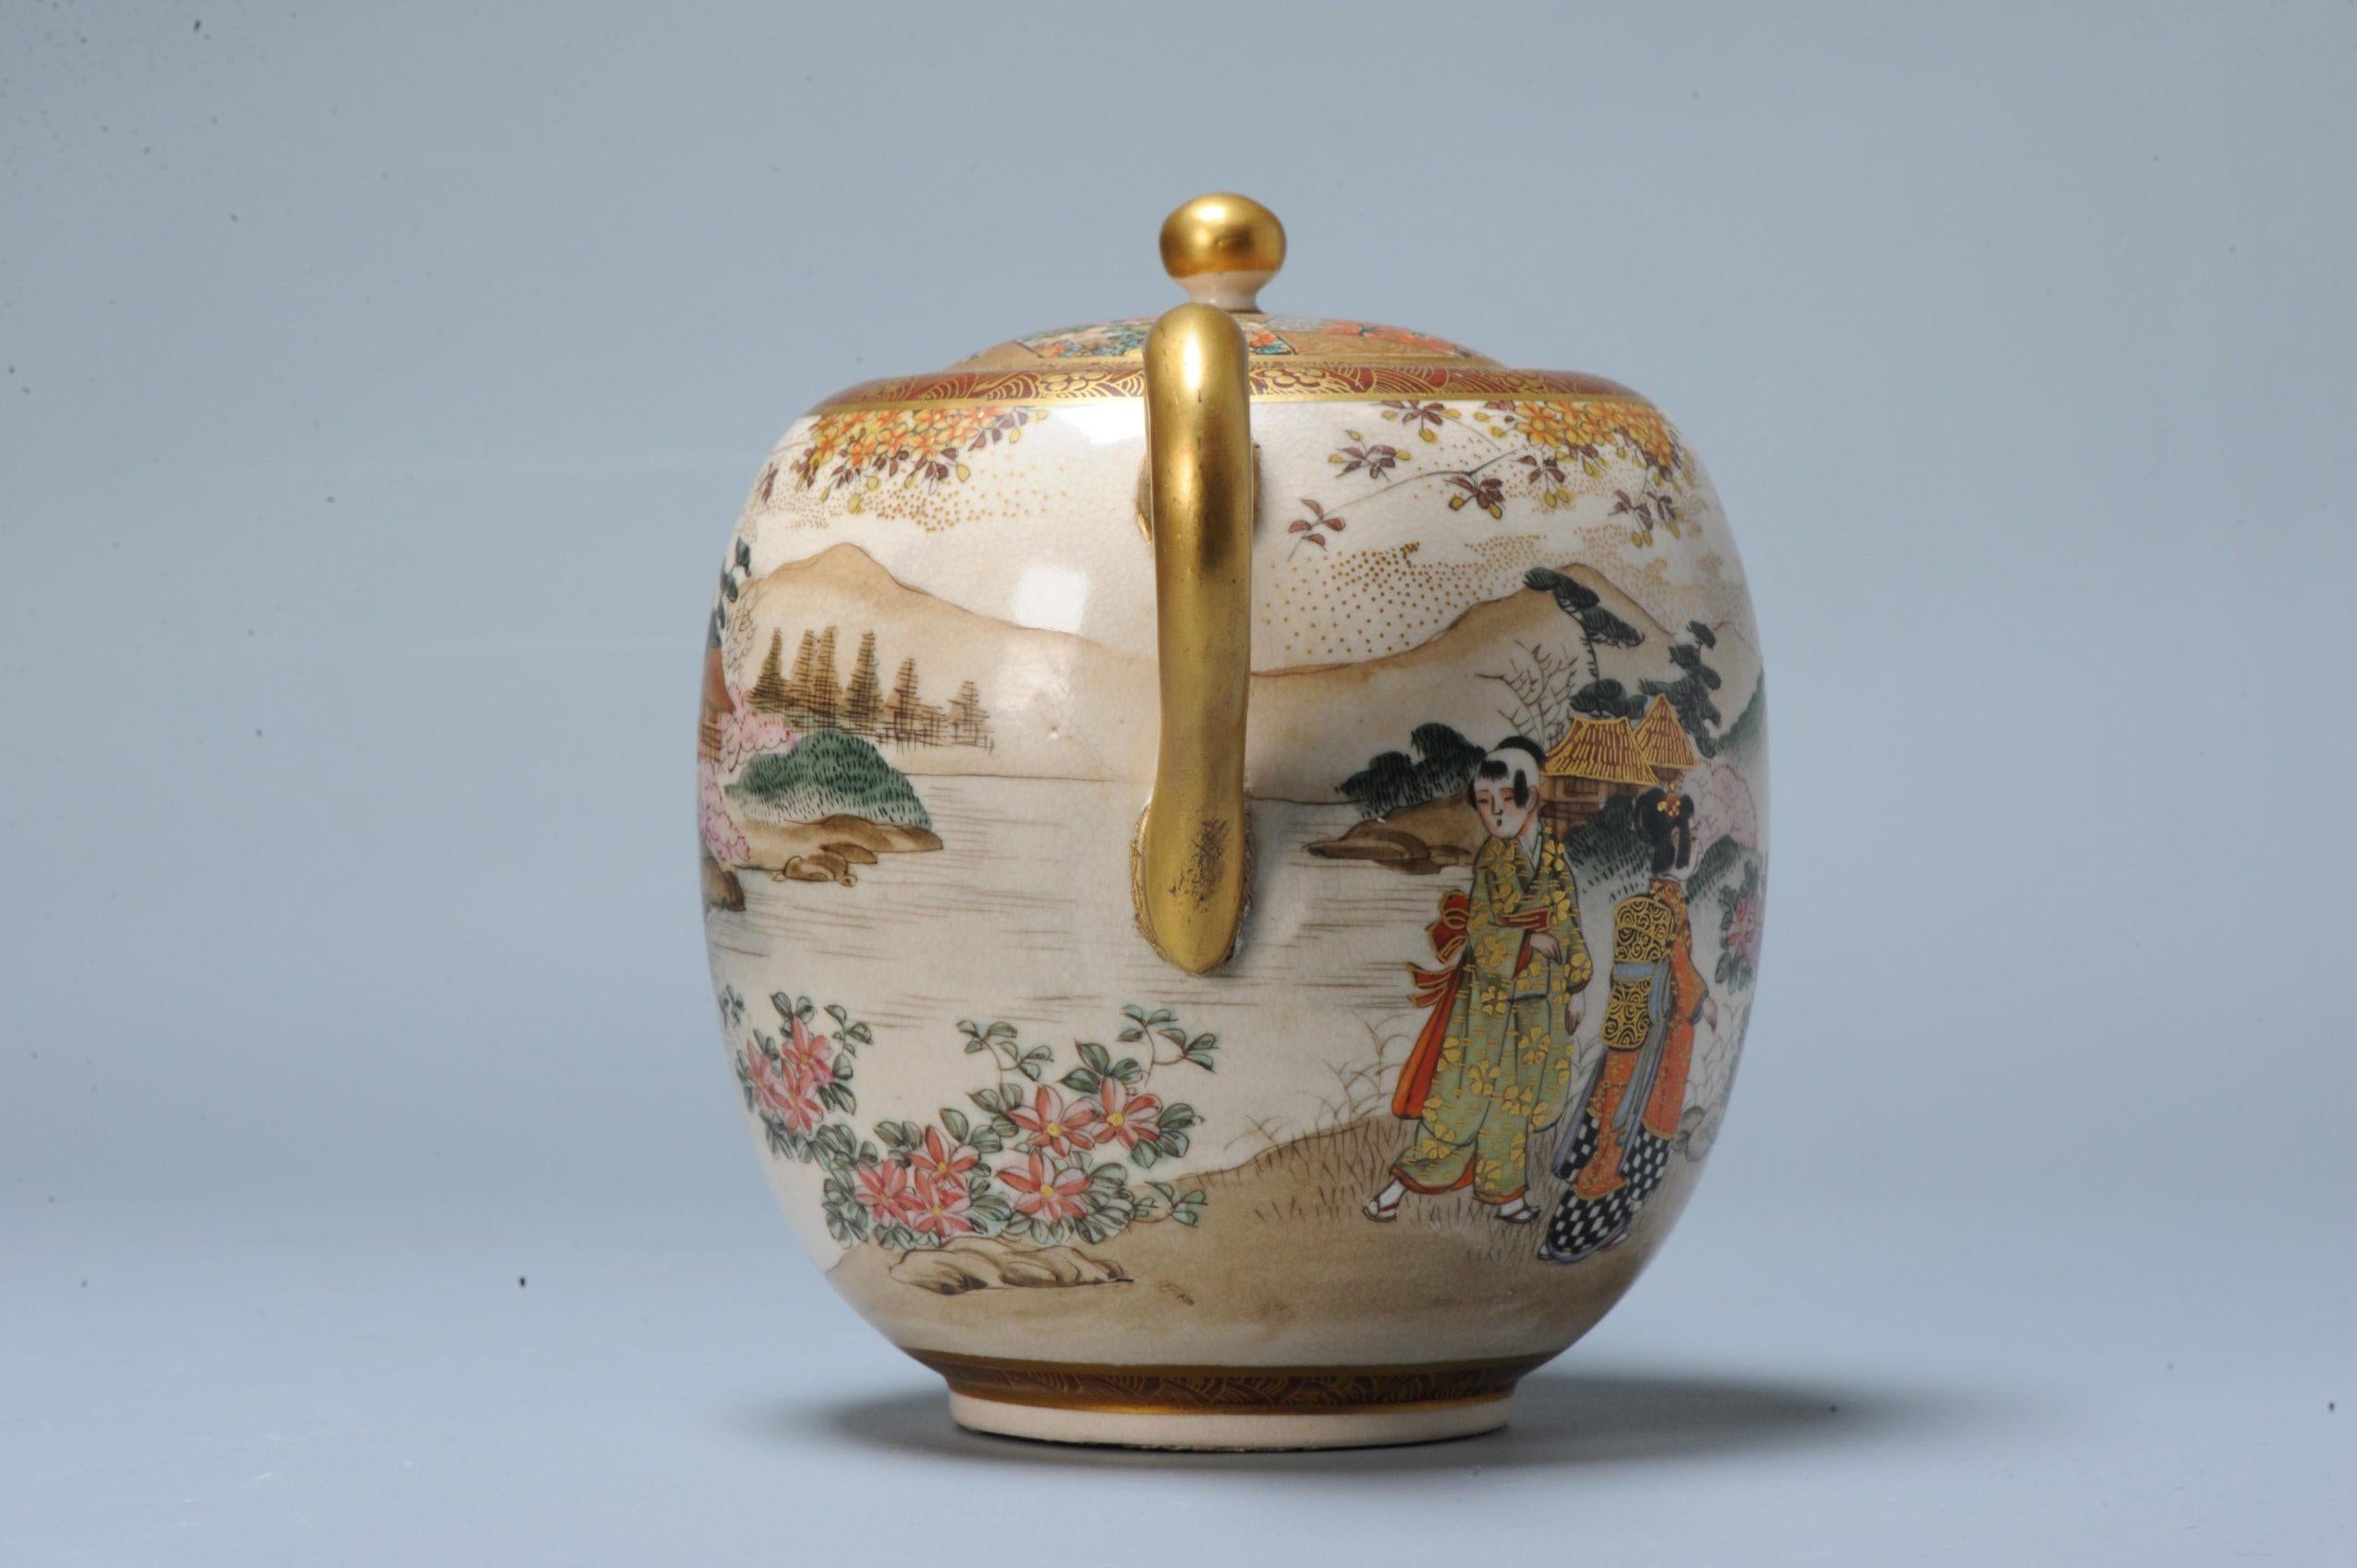 Faboulous and small japanese earthenware jar.

The painting quality is absolutely amazing.

Mark at the base.

Additional information:
Material: Porcelain & Pottery
Type: Jars
Japanese Style: Satsuma
Region of Origin: Japan
Period: 19th century,